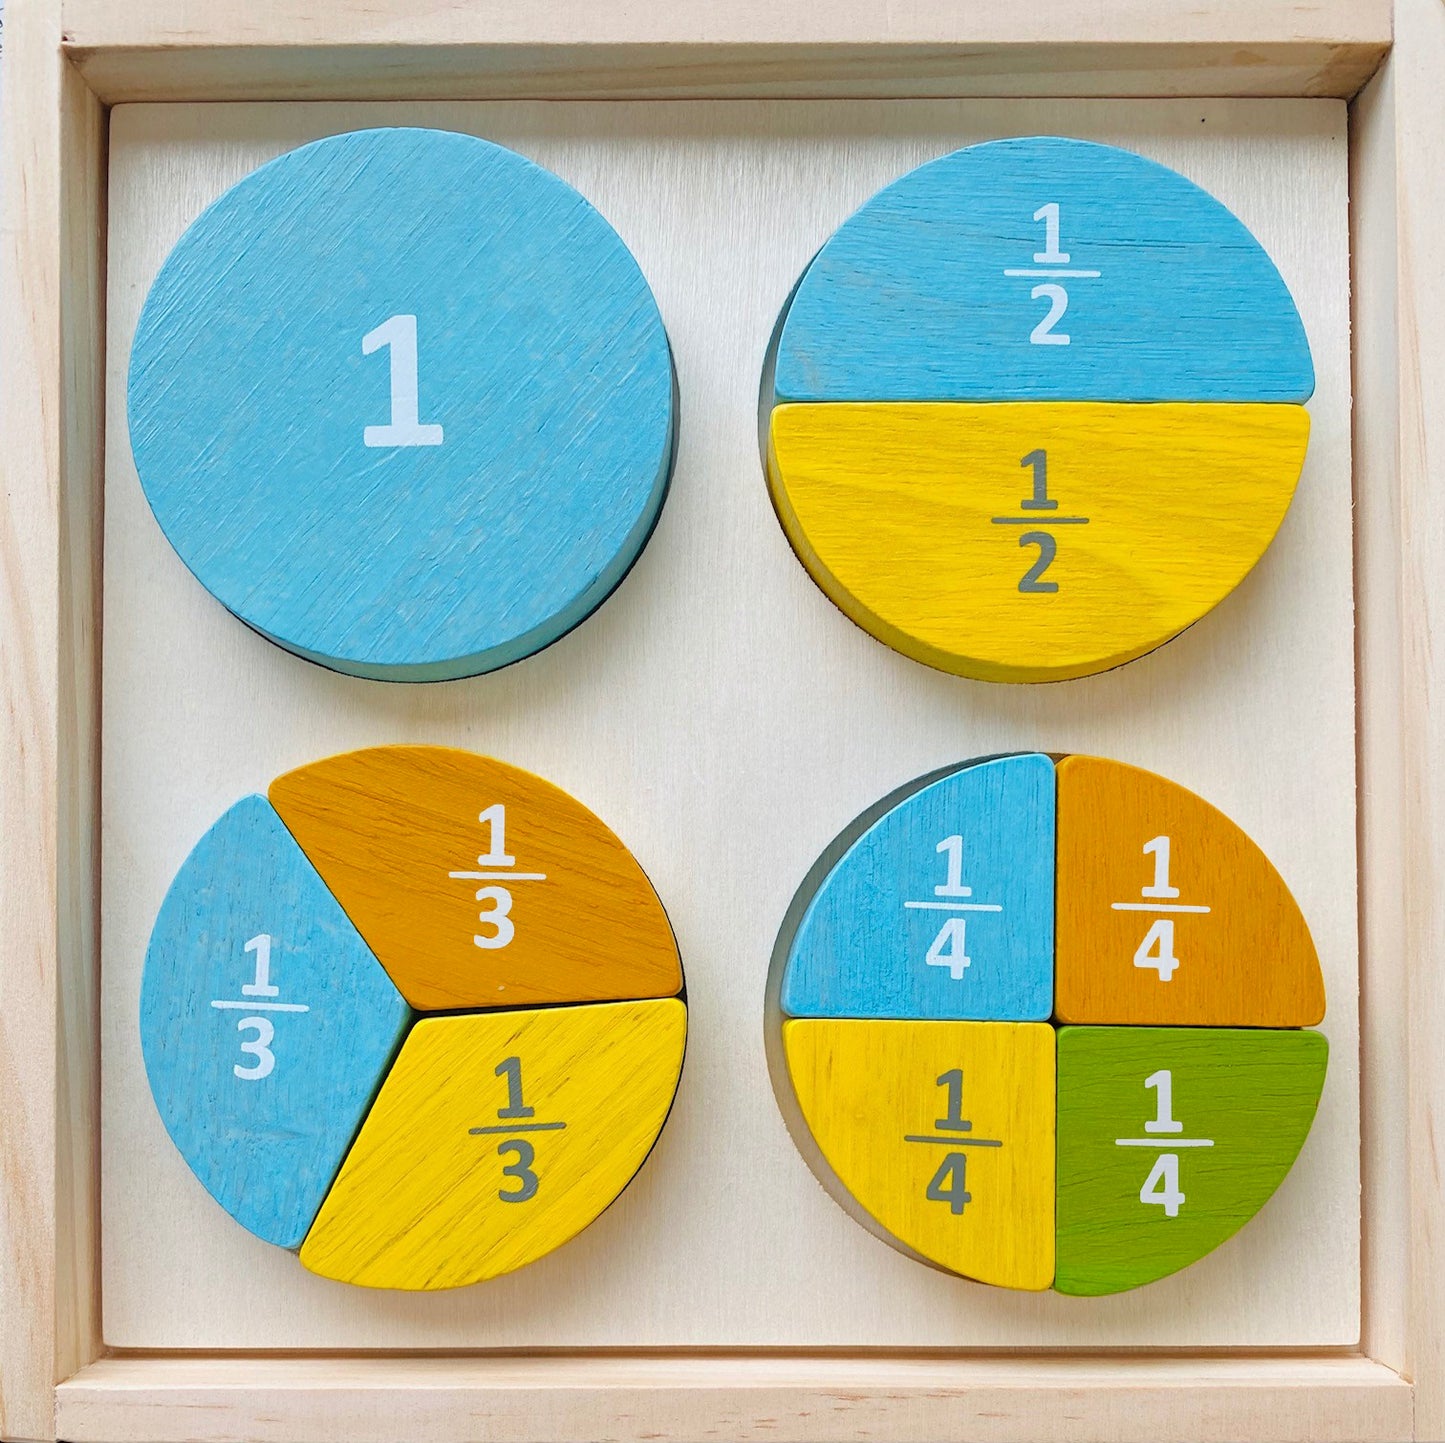 Four wooden circles sit in a wooden box. One is whole, the others are divided and labeled by their respective fractions ranging from 1/2, 1/3, and 1/4